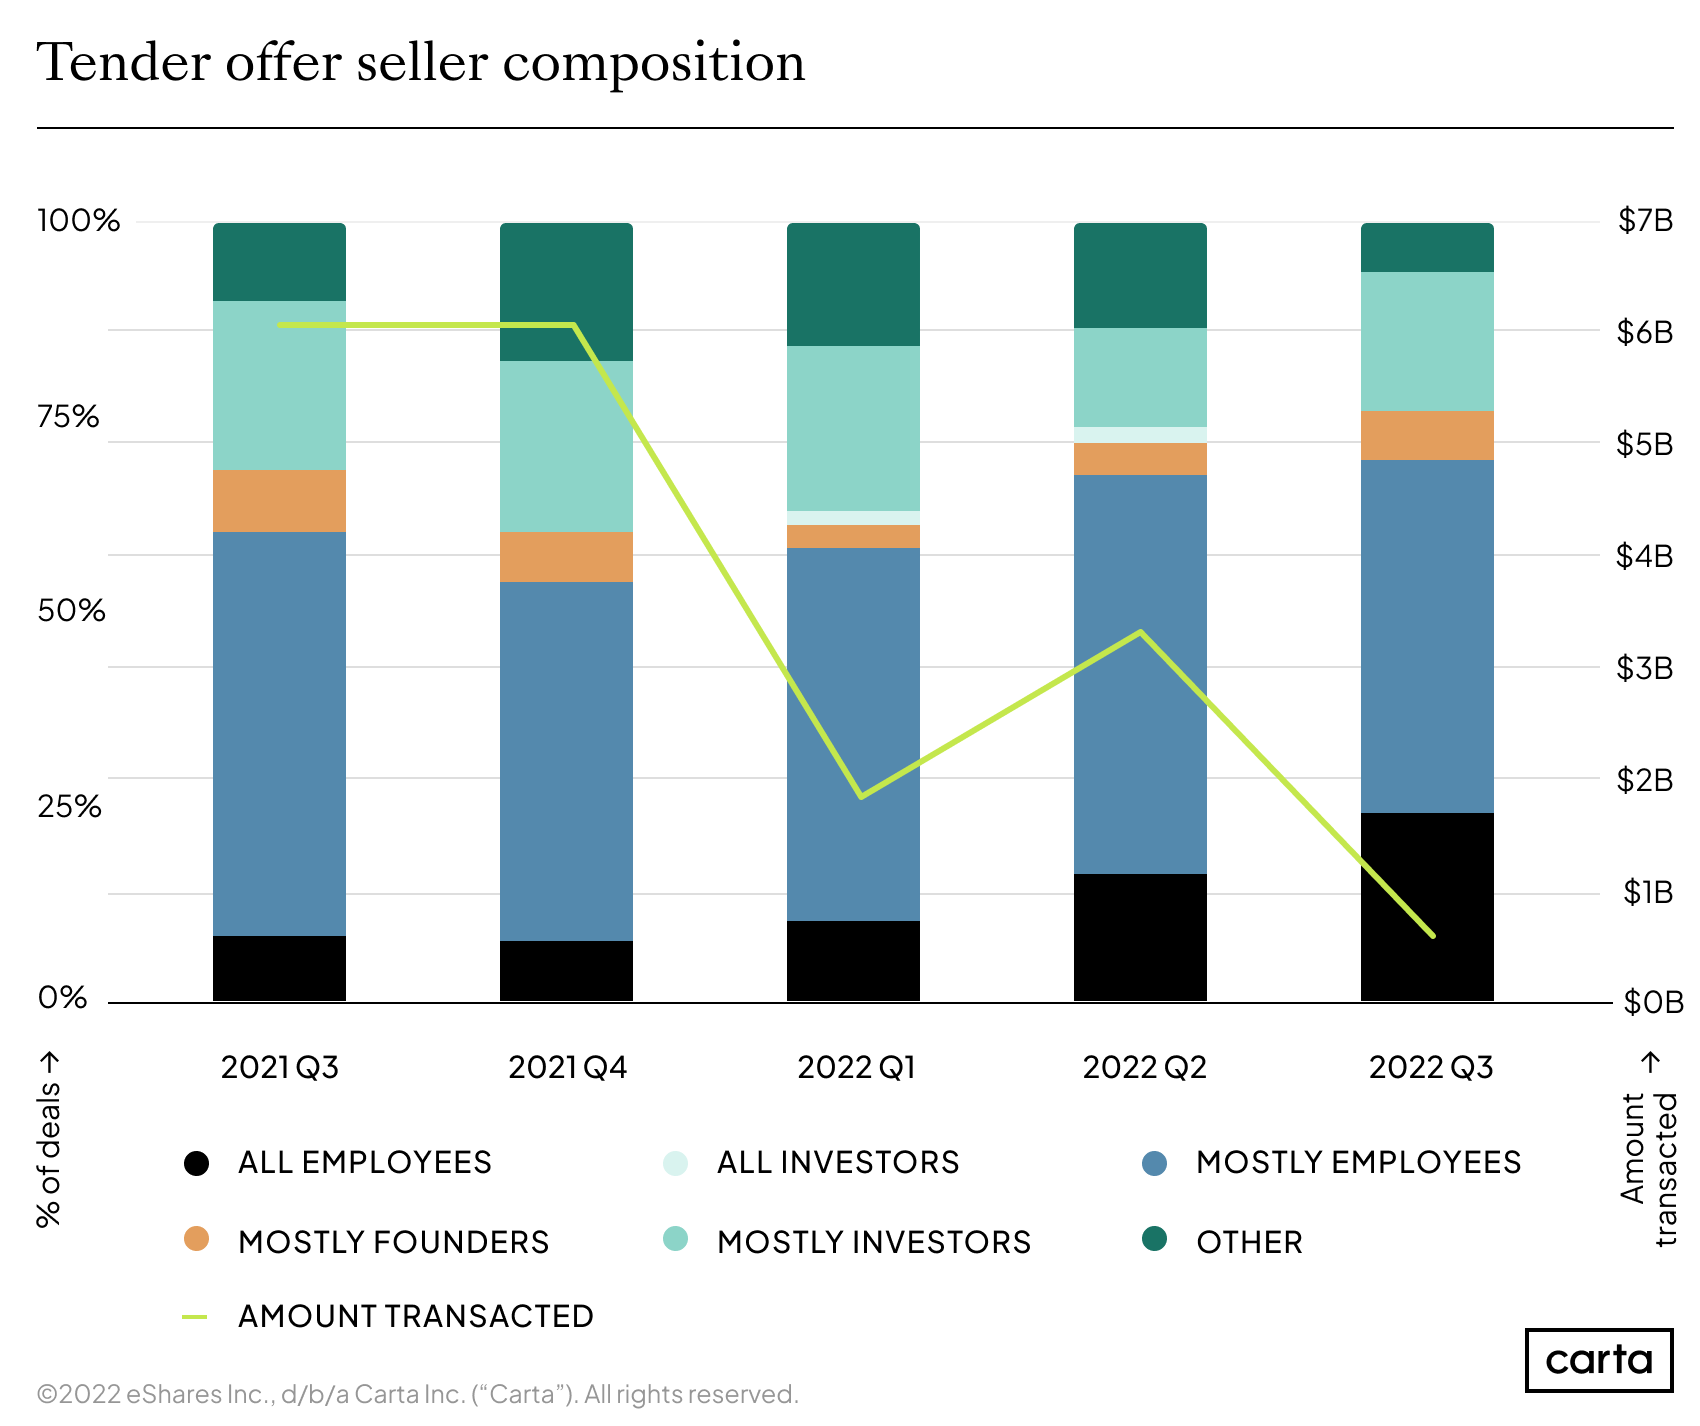 Seller composition for tender offers for all Carta companies conducting tender offers in Q3 2020